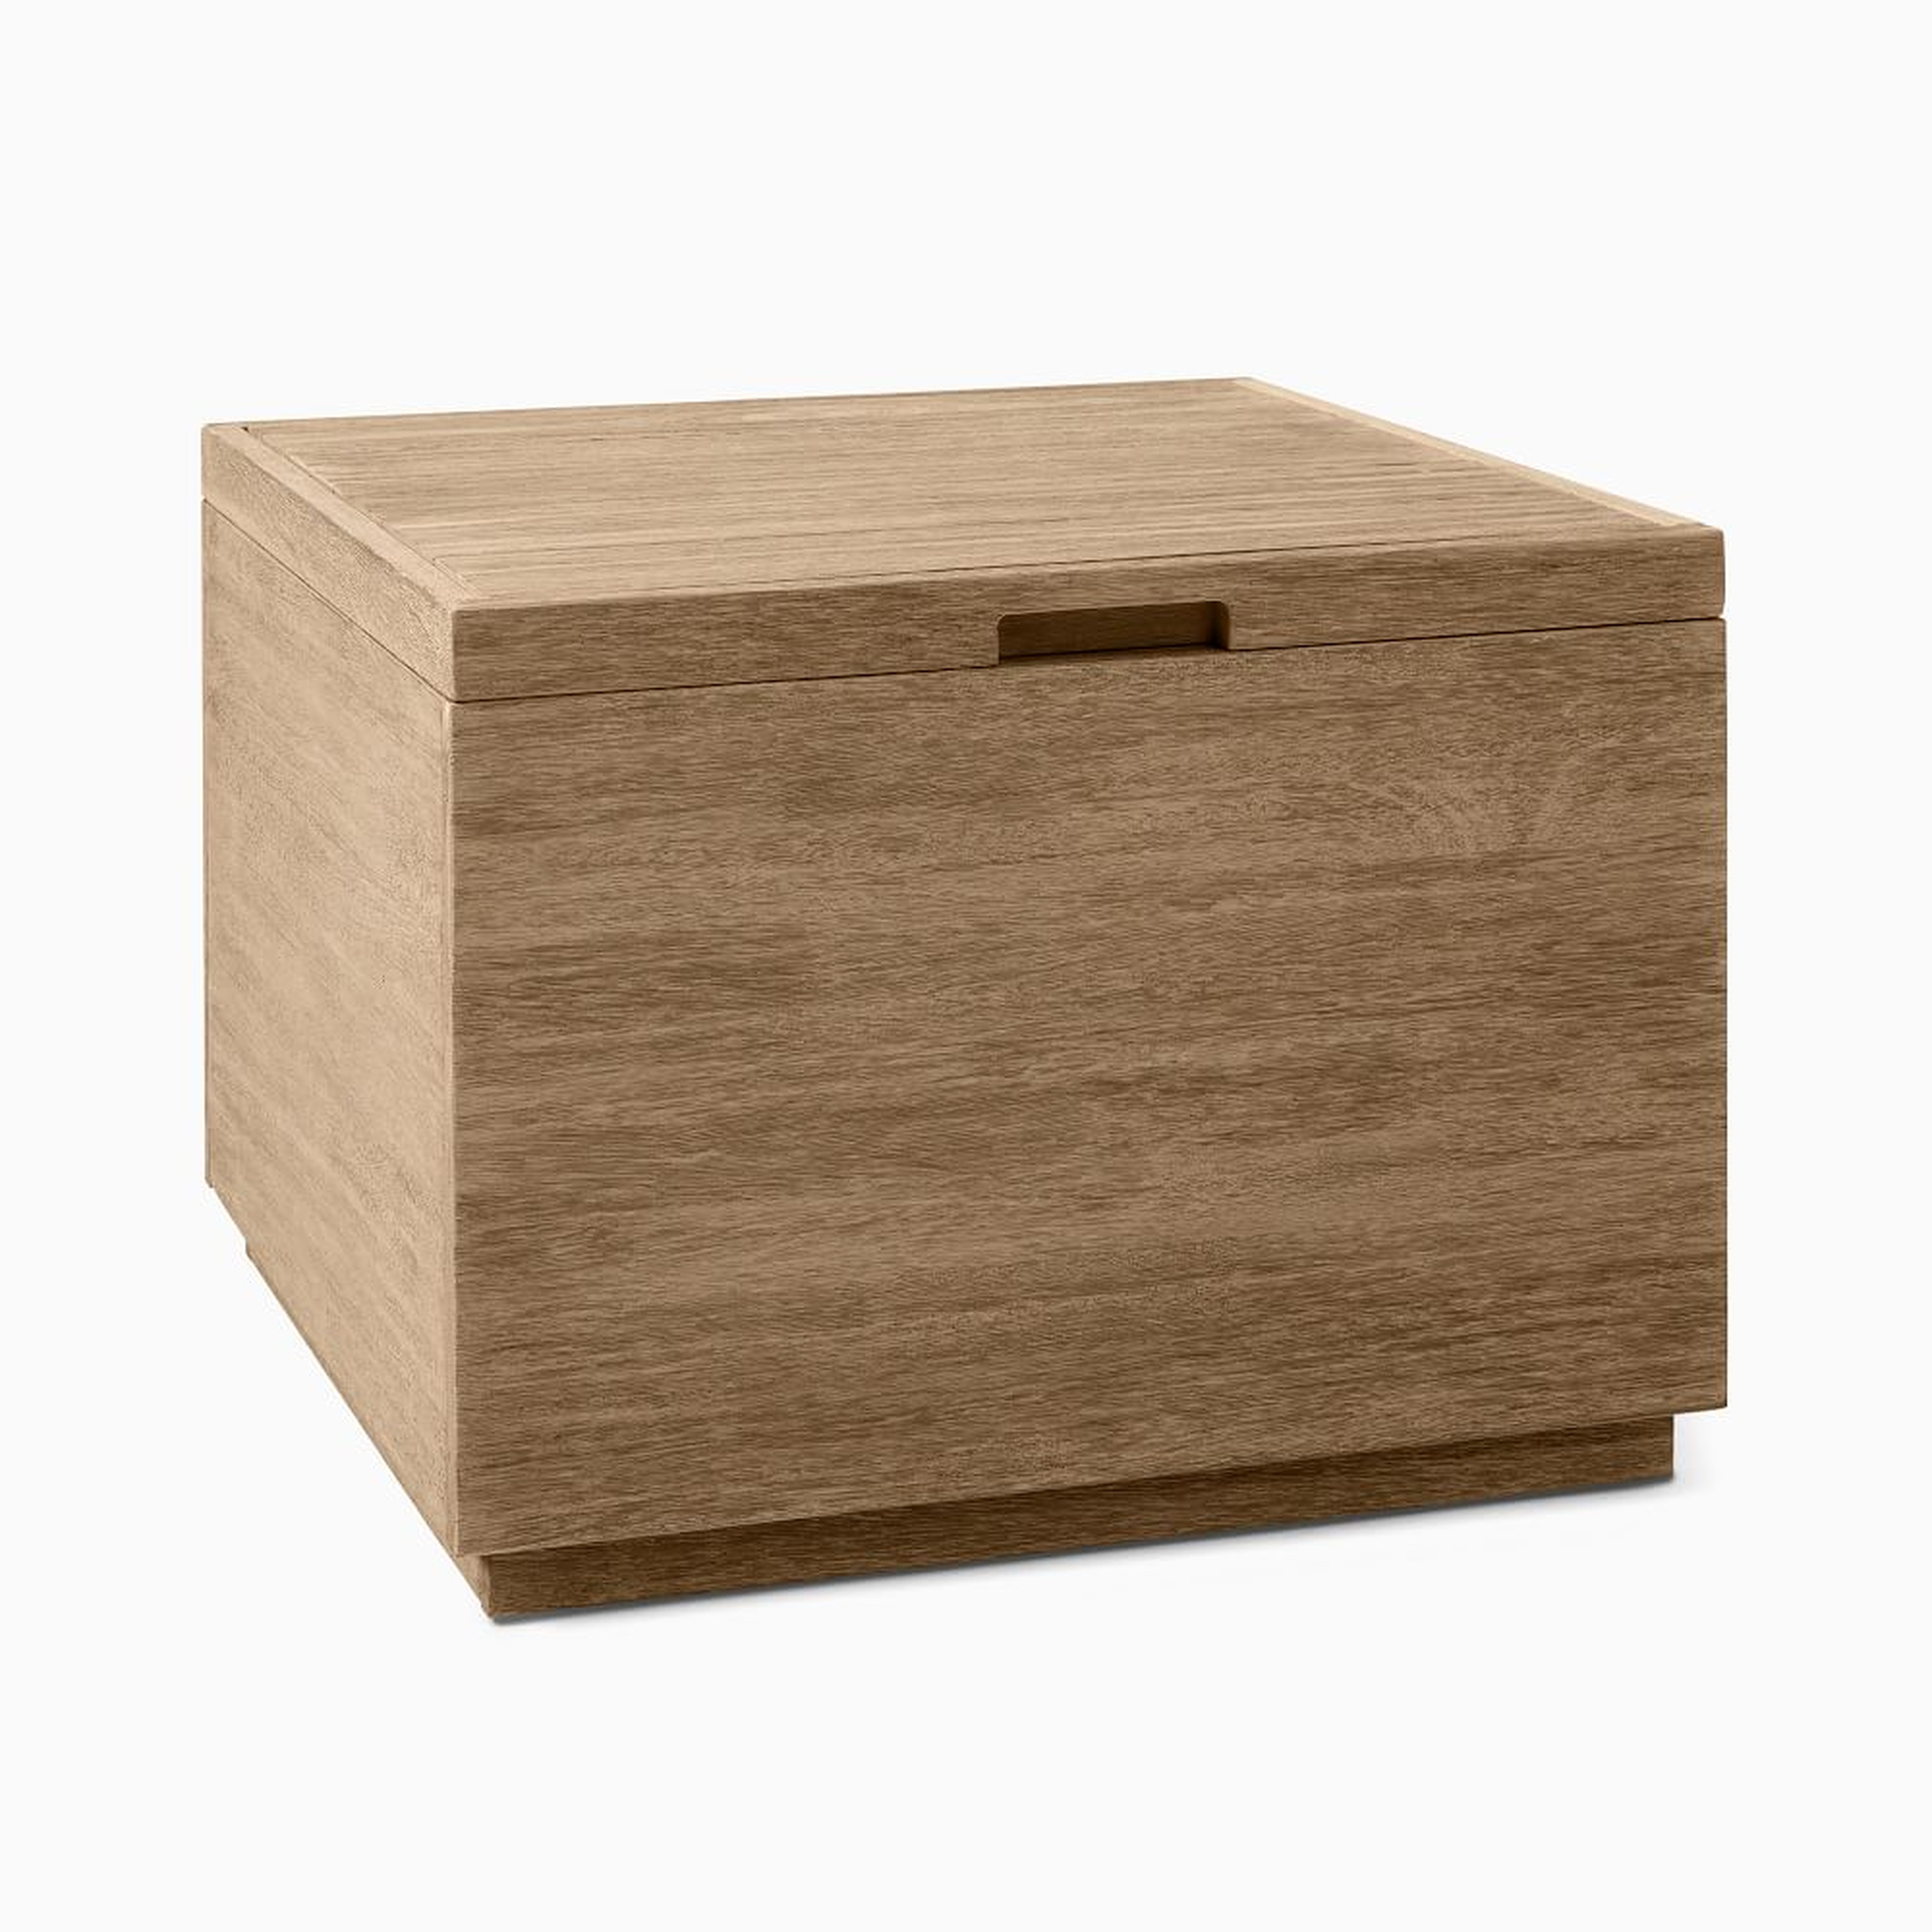 Volume Outdoor 26 in Square Storage Side Table, Driftwood - West Elm